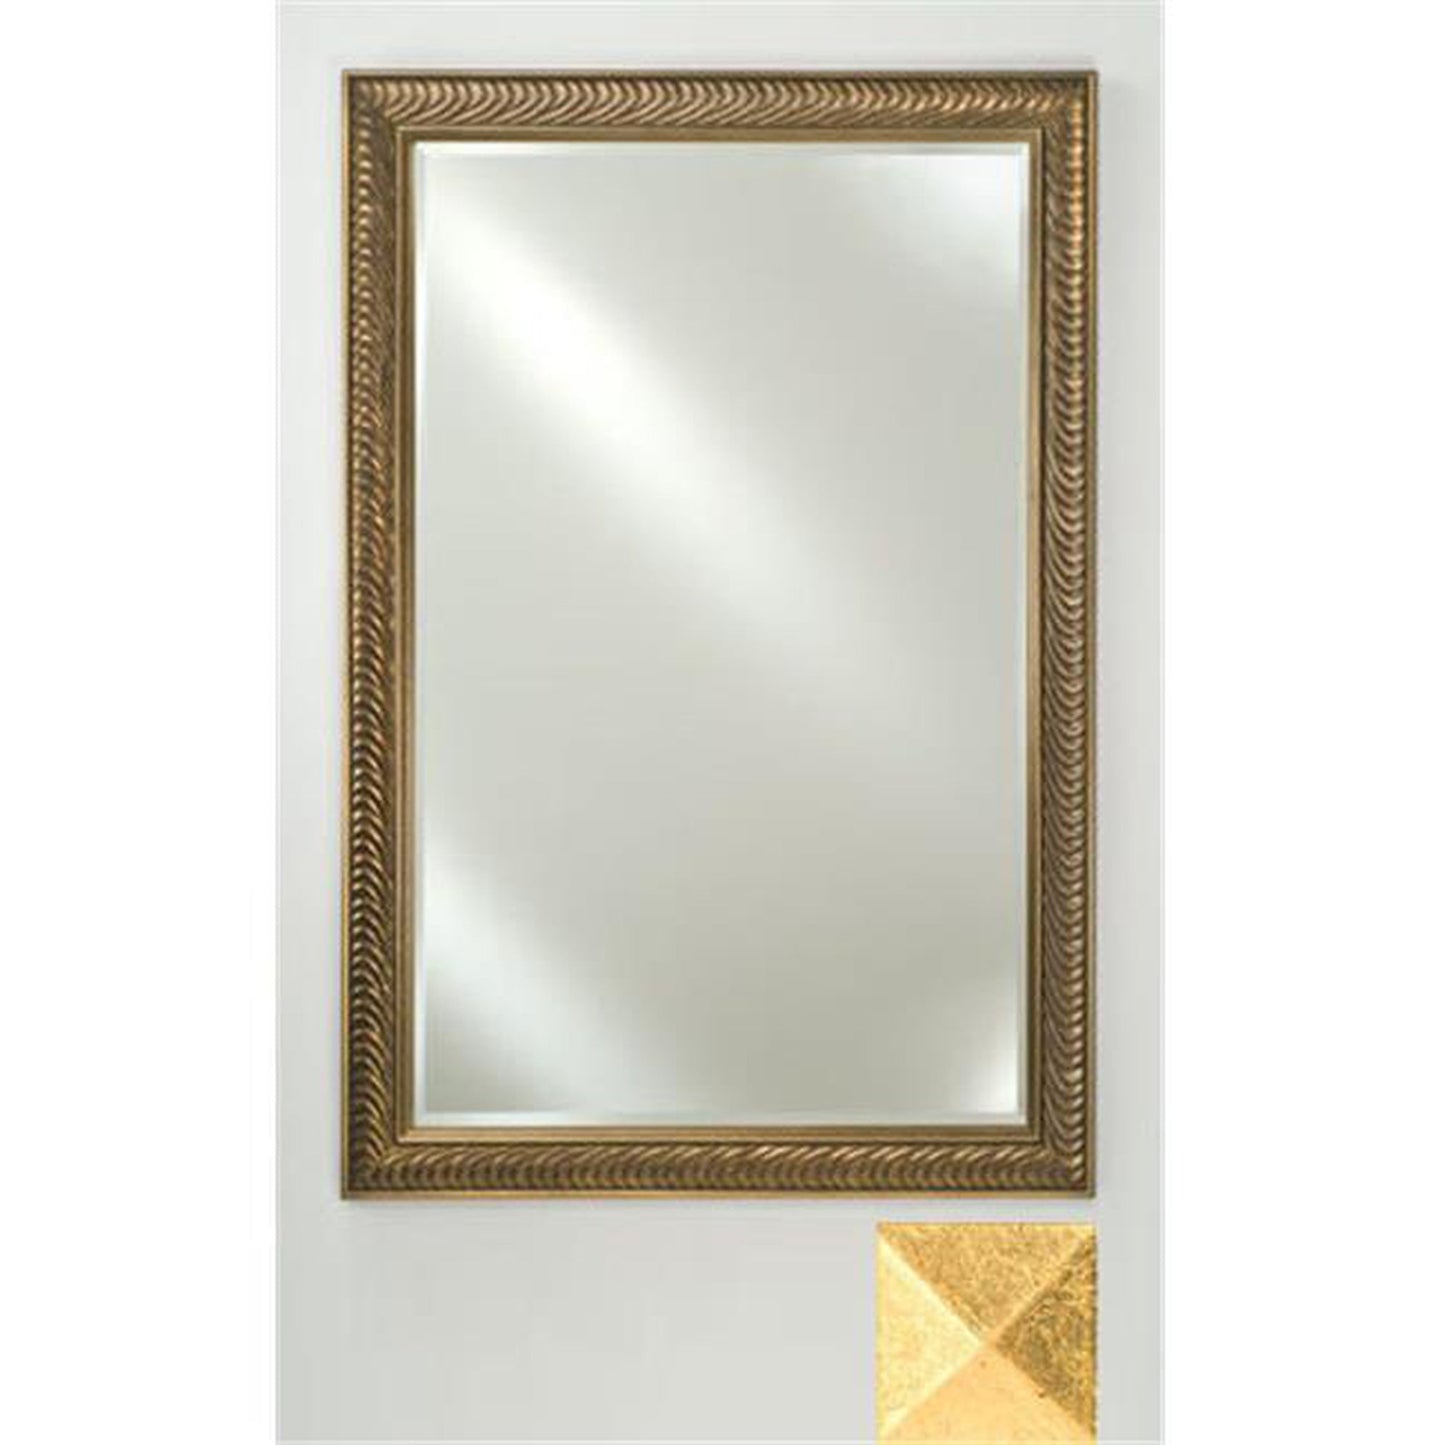 Afina Signature 16" x 22" Meridian Antique Gold With Antique Gold Caps Framed Mirror With Beveled Edge